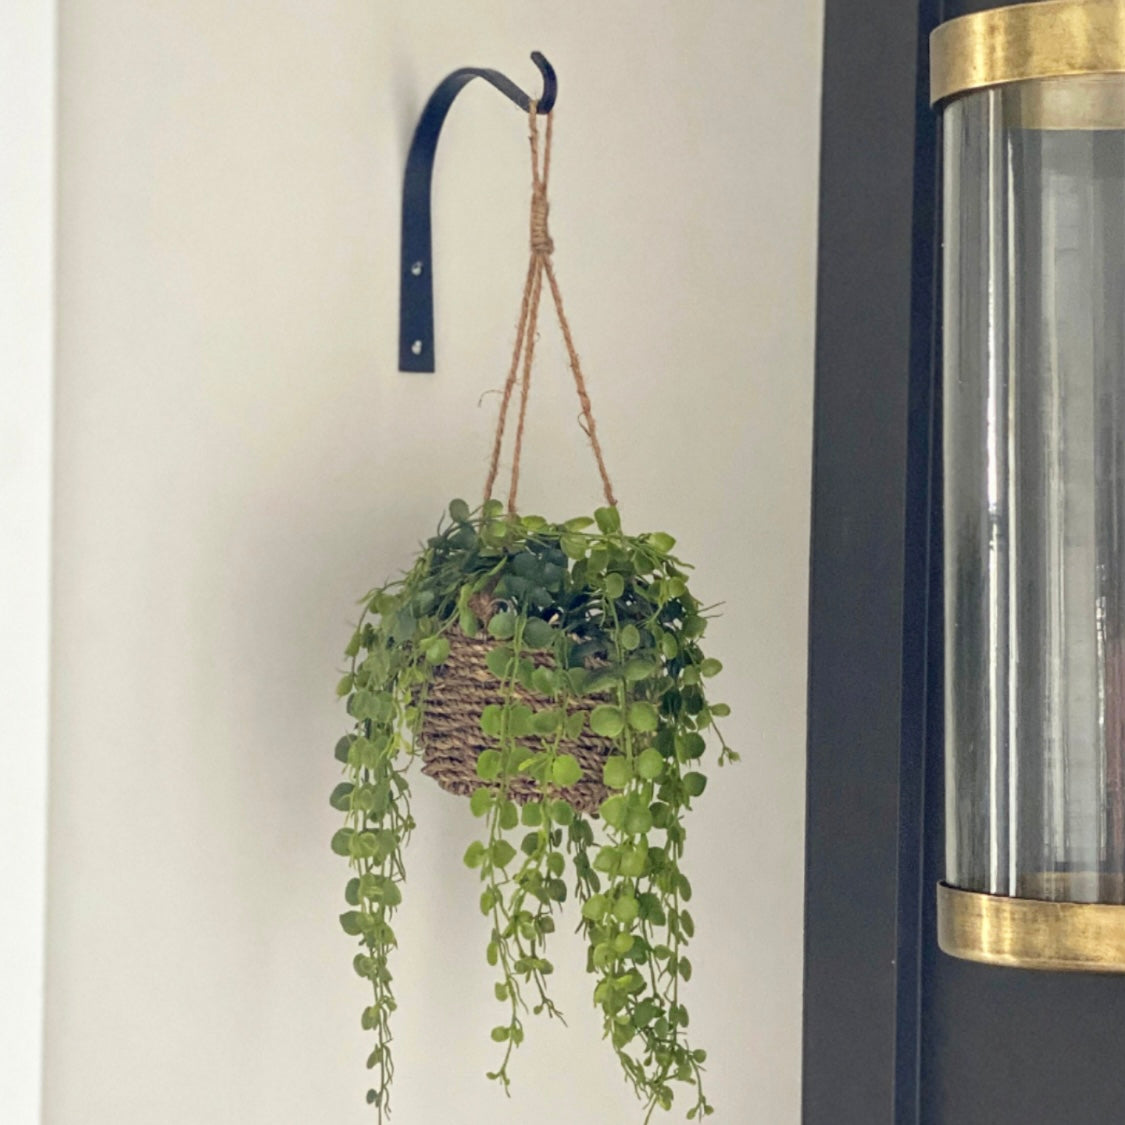 Hanging Basket with Greenery- 50% OFF SALE